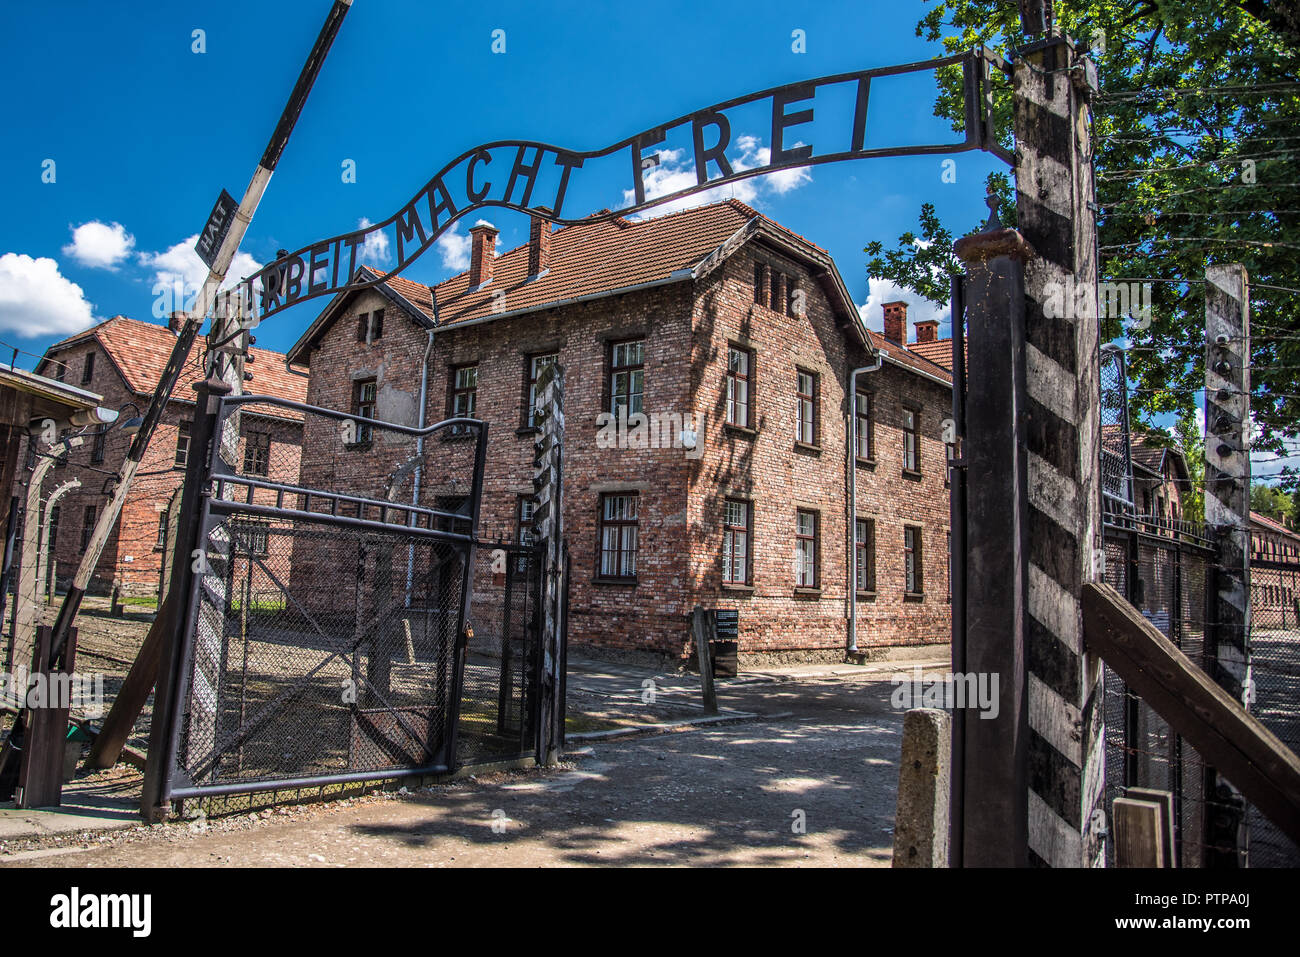 Arbeit macht frei in Auschwitz Poland during the holocaust. Concentration camp in Auschwitz Birkenau controlled by the nazis of the NSDAP in Germany Stock Photo